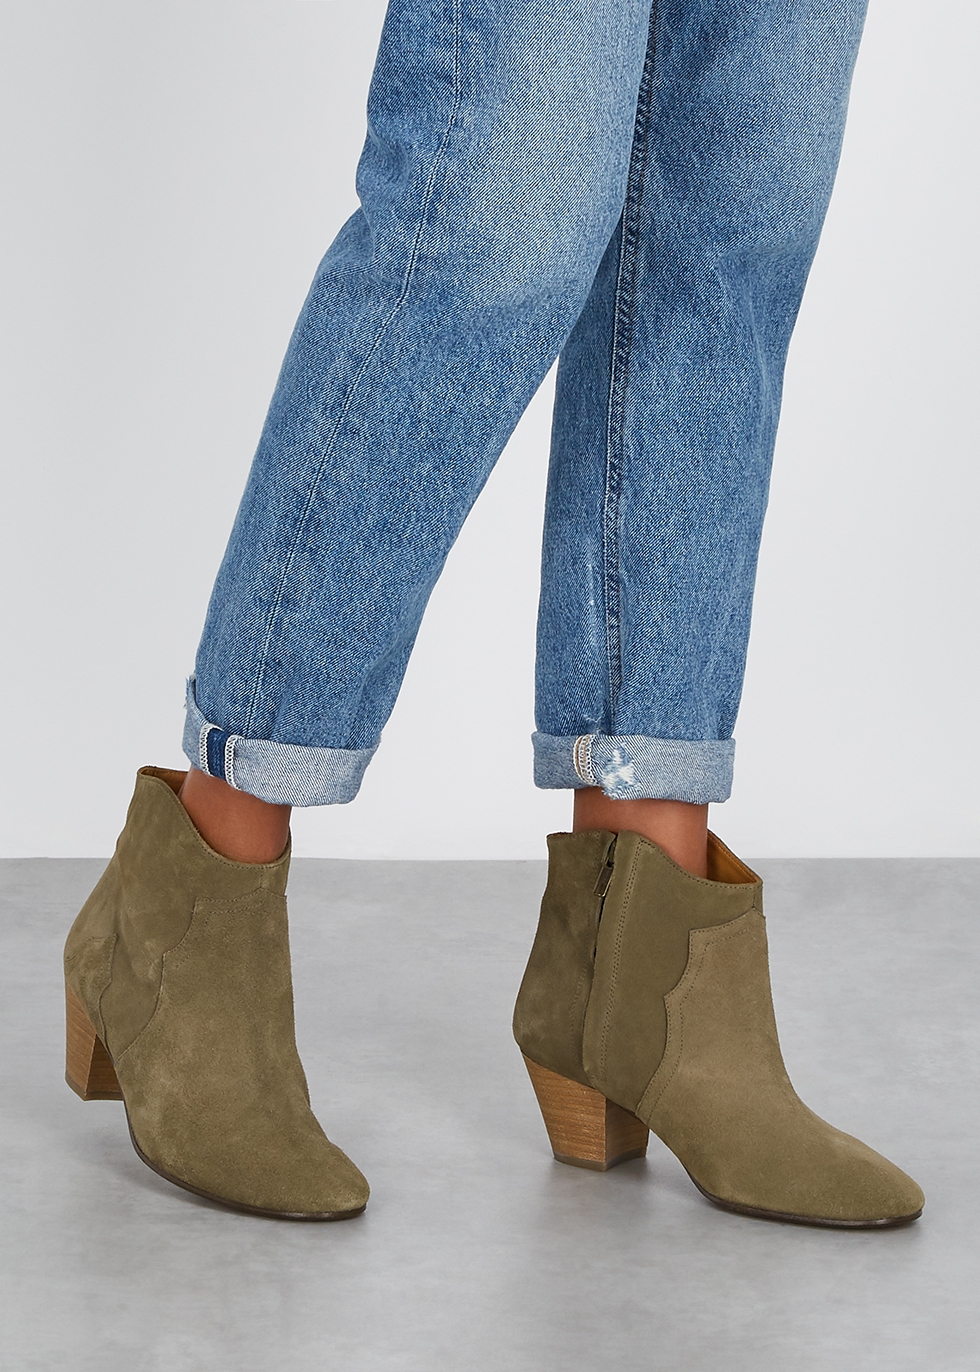 camel chelsea boots outfit